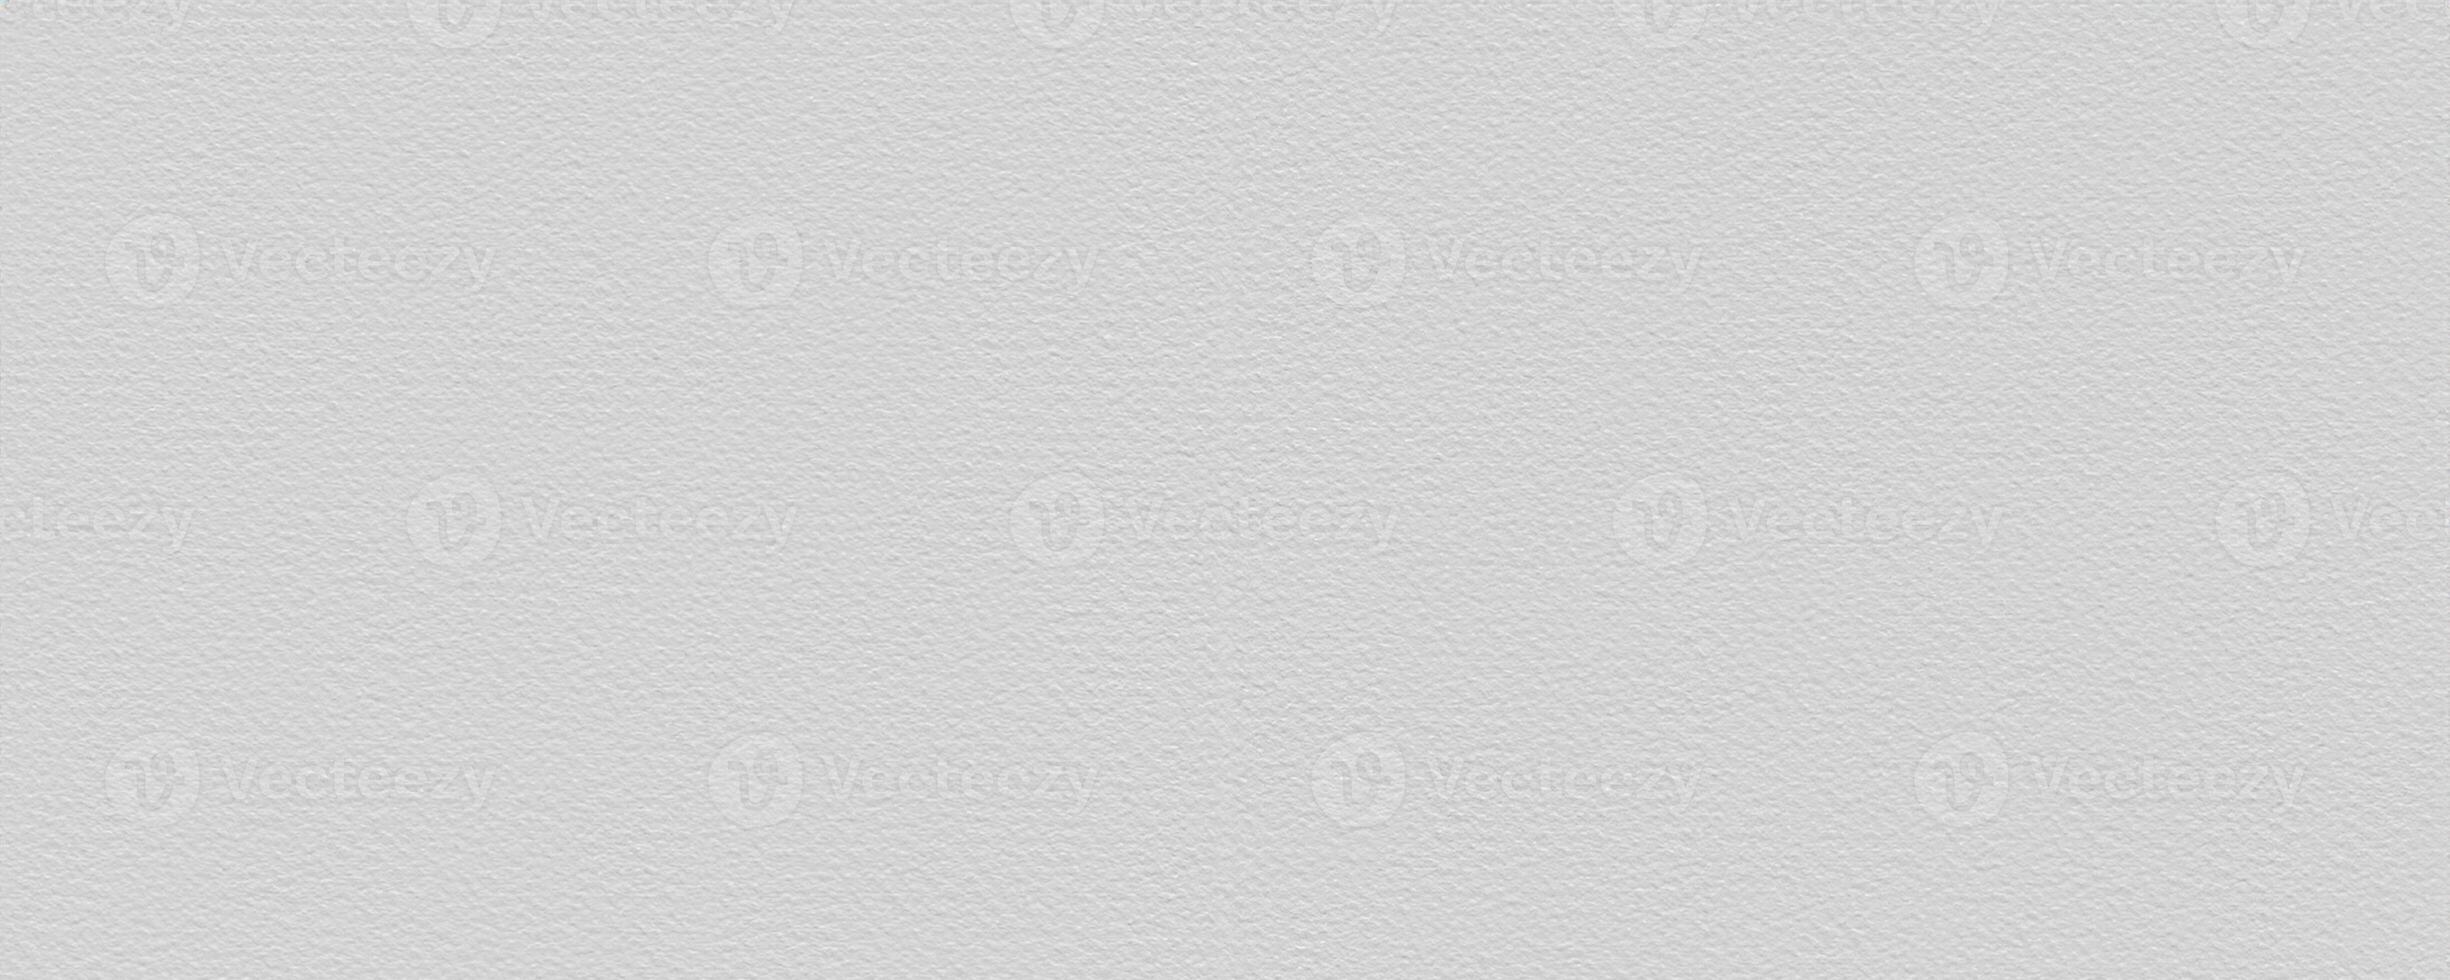 White watercolor paper texture background photo